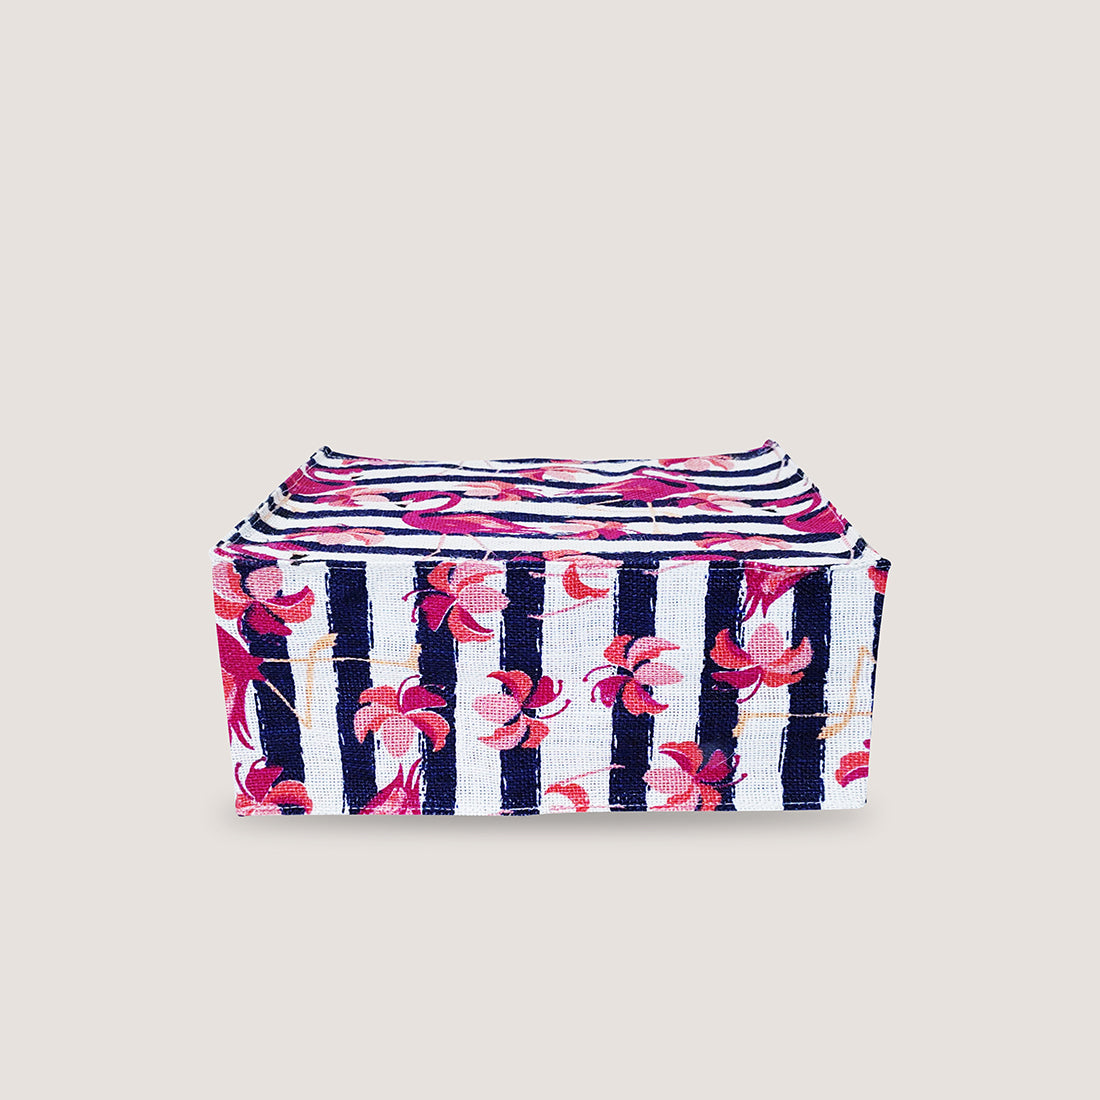 EARTHBAGS FLAMINGO PRINTED LUNCH BAG WITH PADDED HANDLES